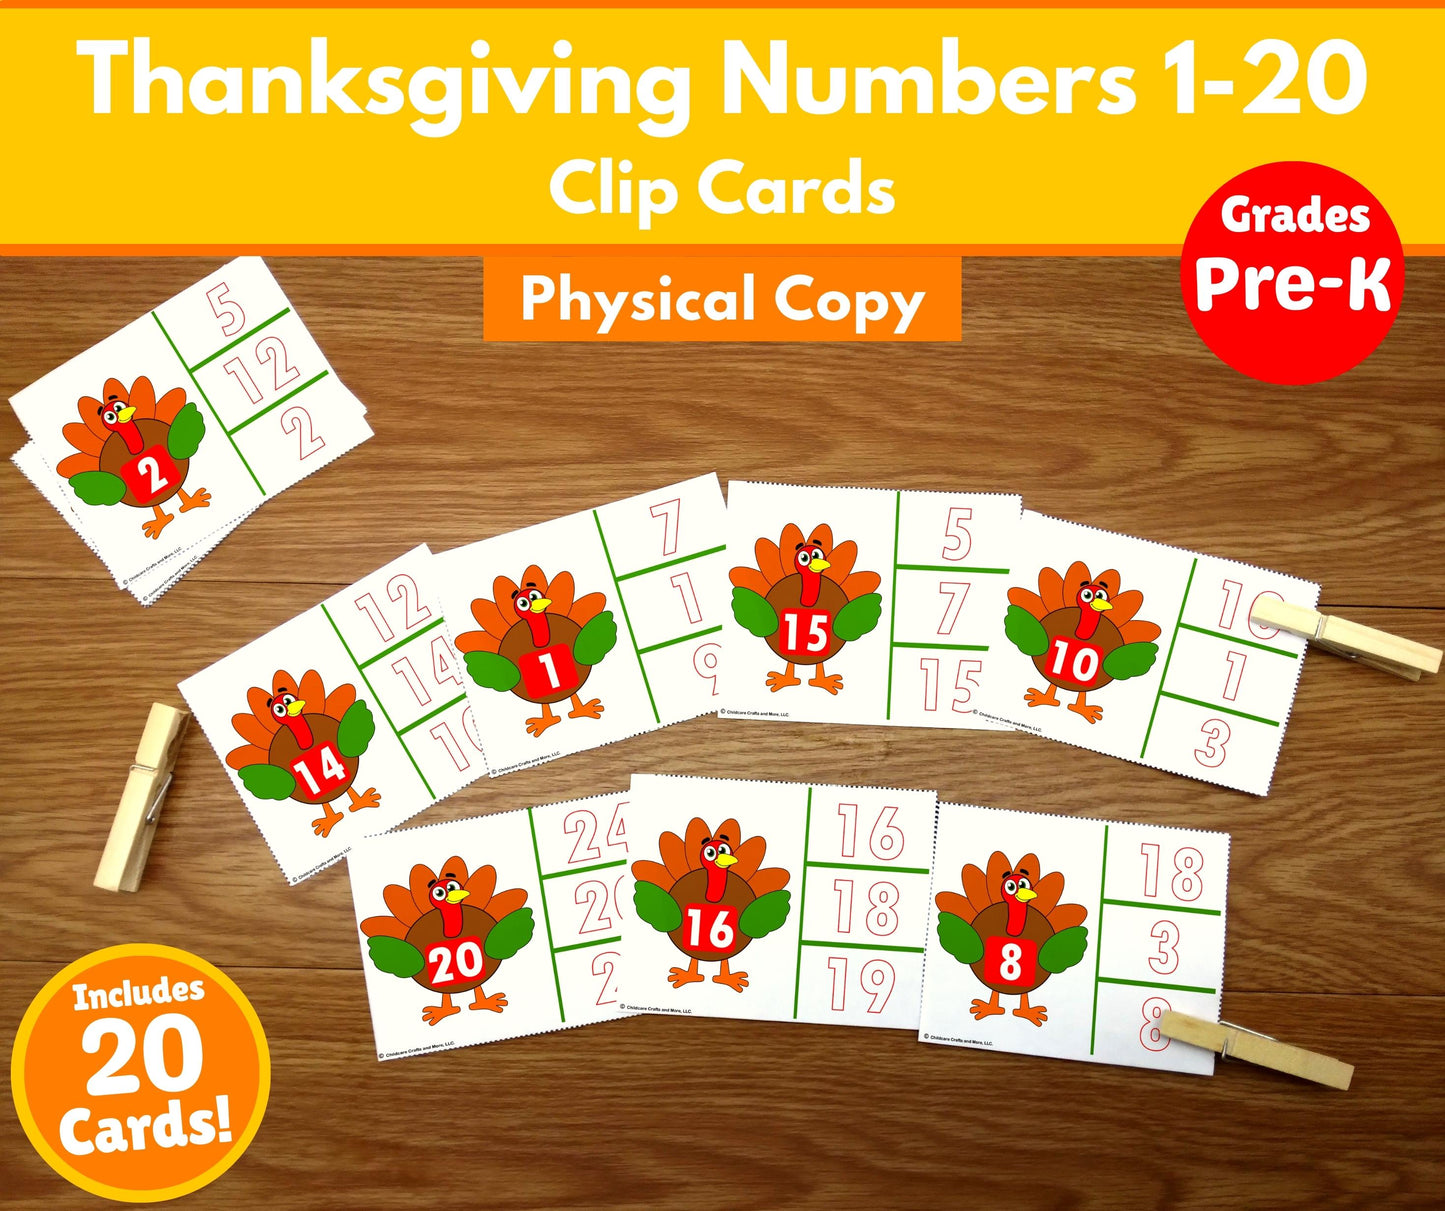 Thanksgiving Numbers (1-20) Clip Cards